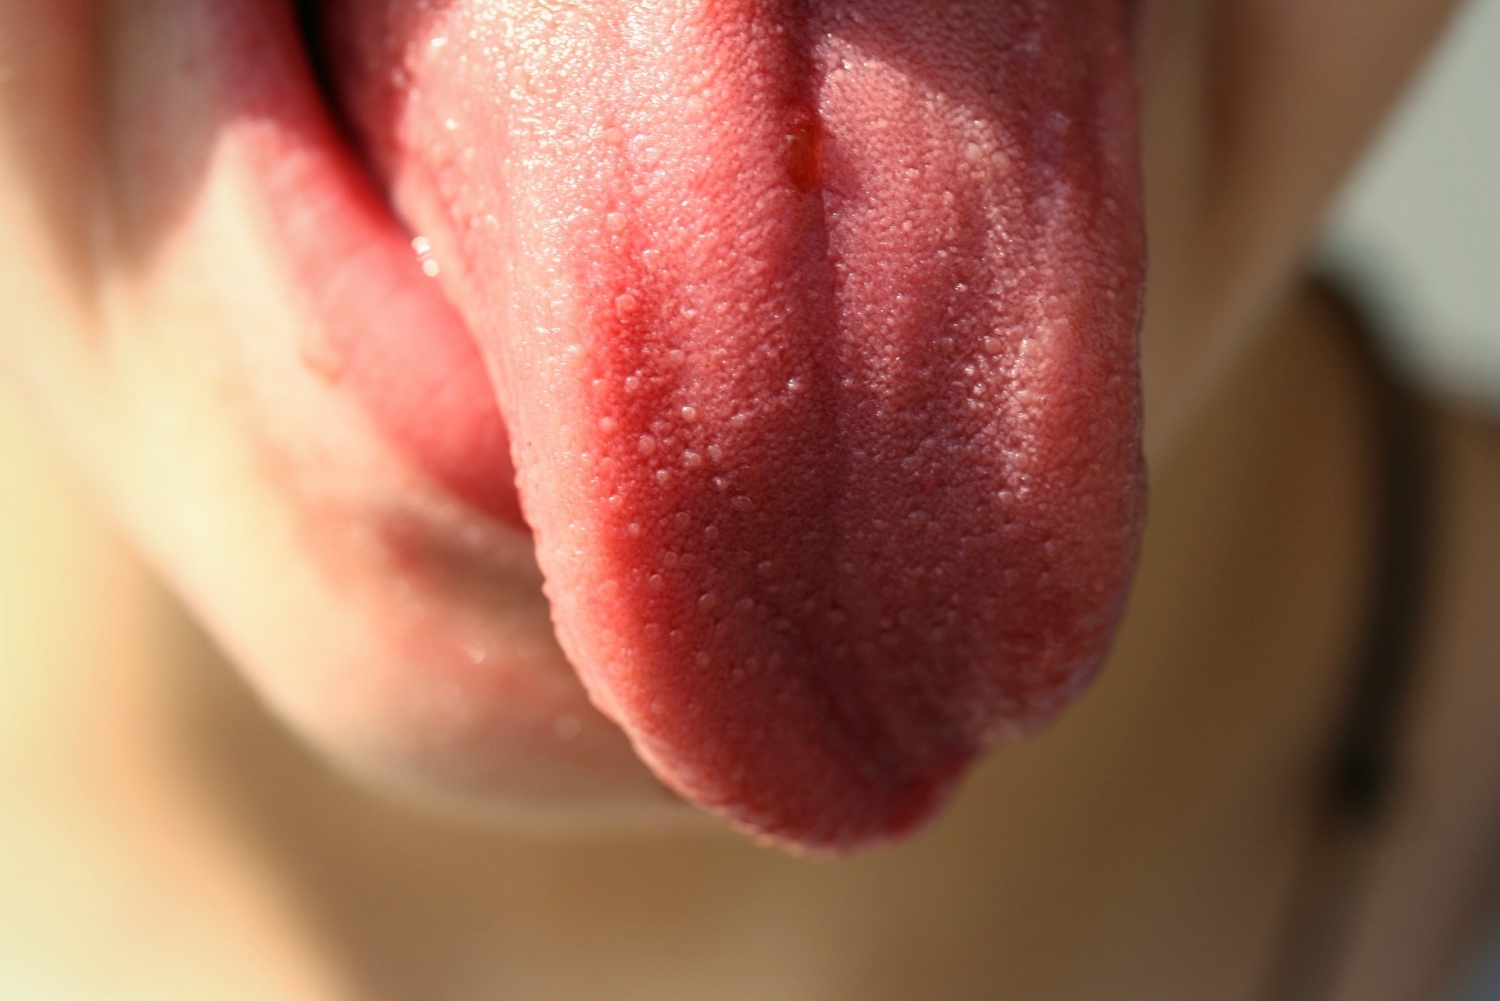 Scientists Develop ‘Electric Tongue’ That Mimics Human Taste Buds, Introducing Emotional Intelligence to AI